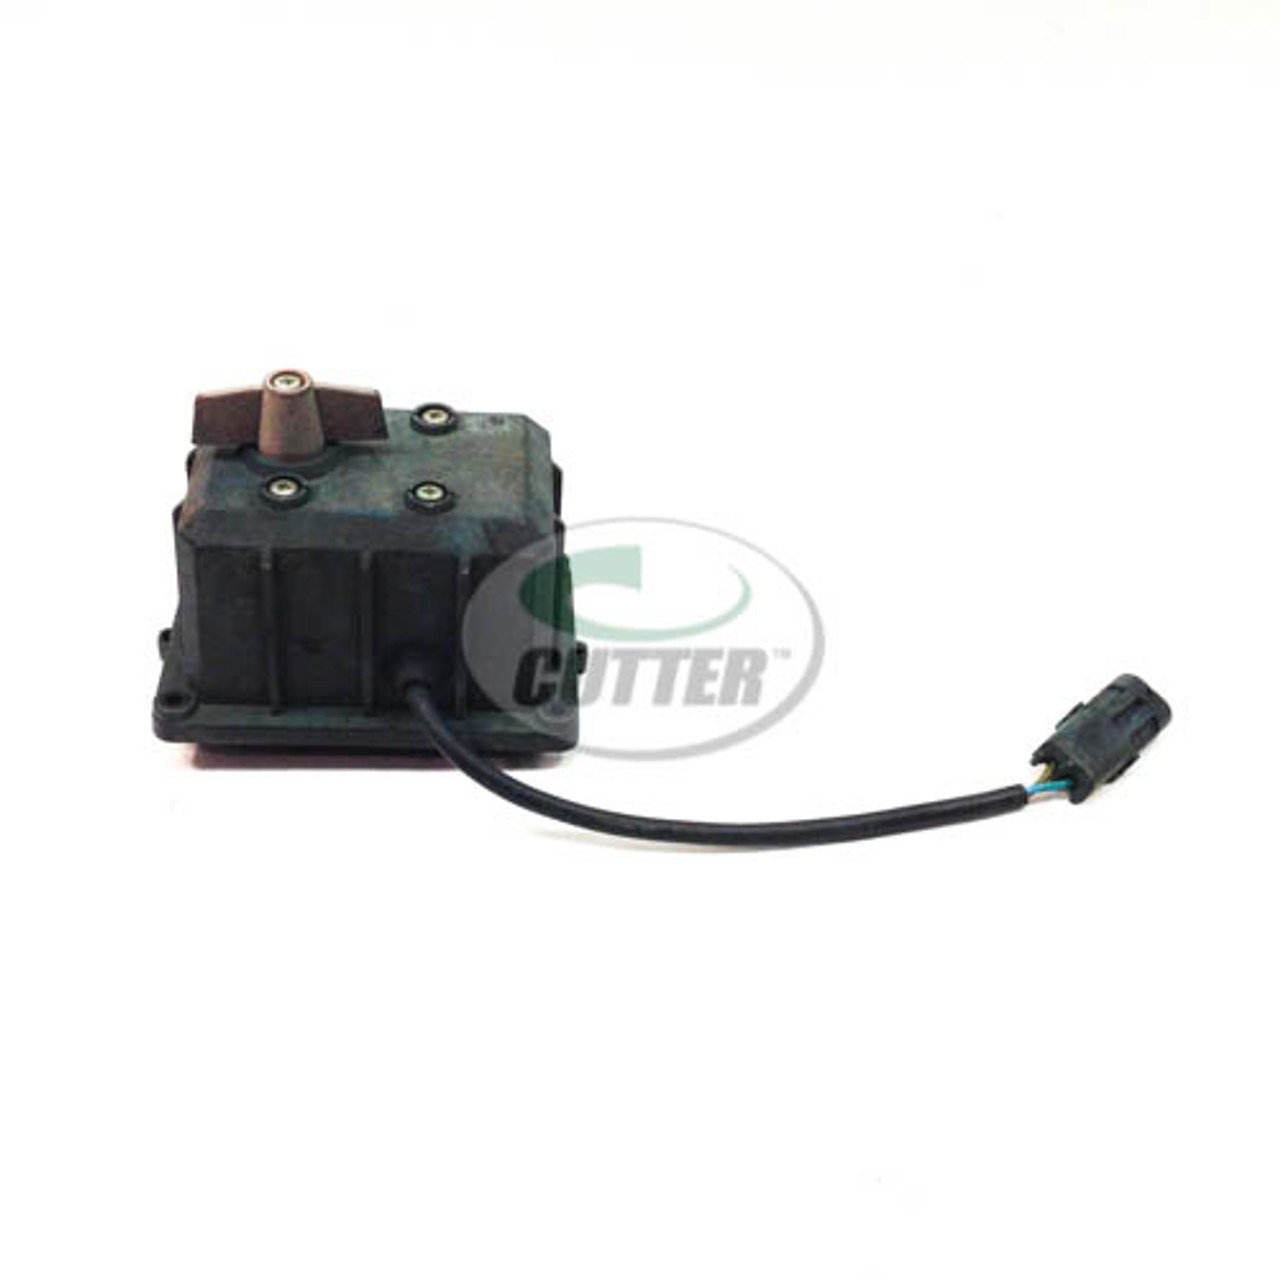 Toro Used Rate Control Motor Assembly - 108-3351